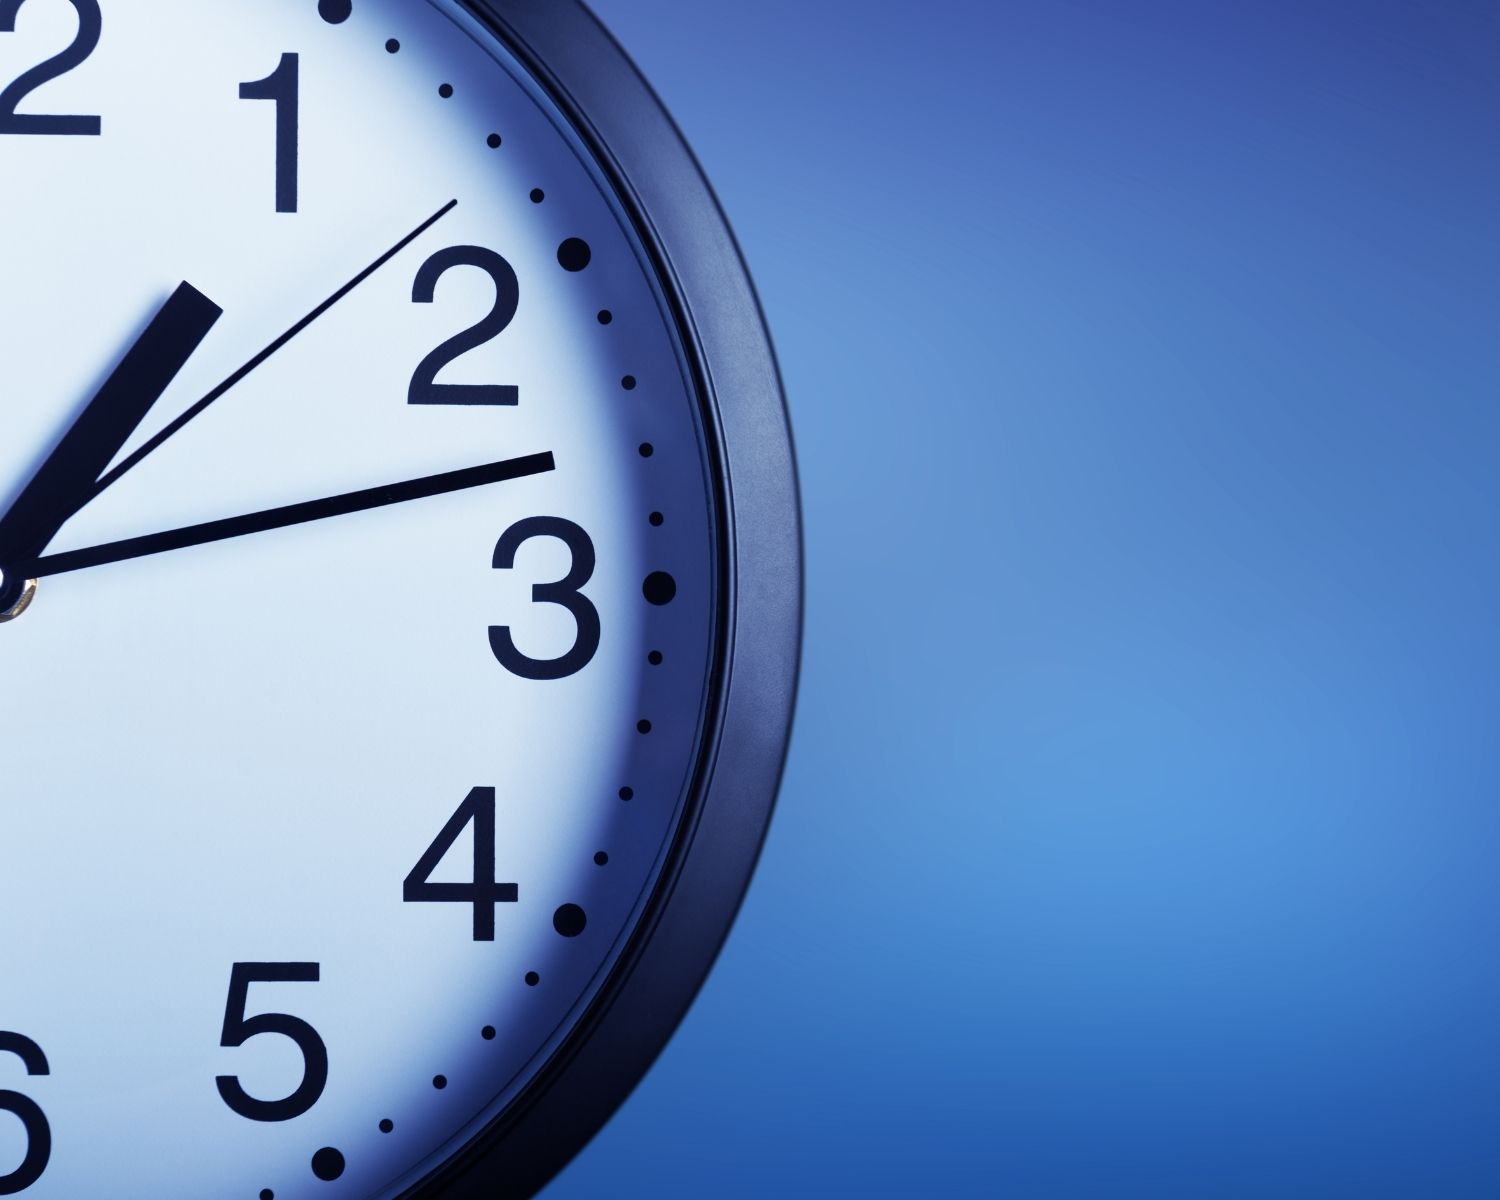 An image of a clock with a blue background